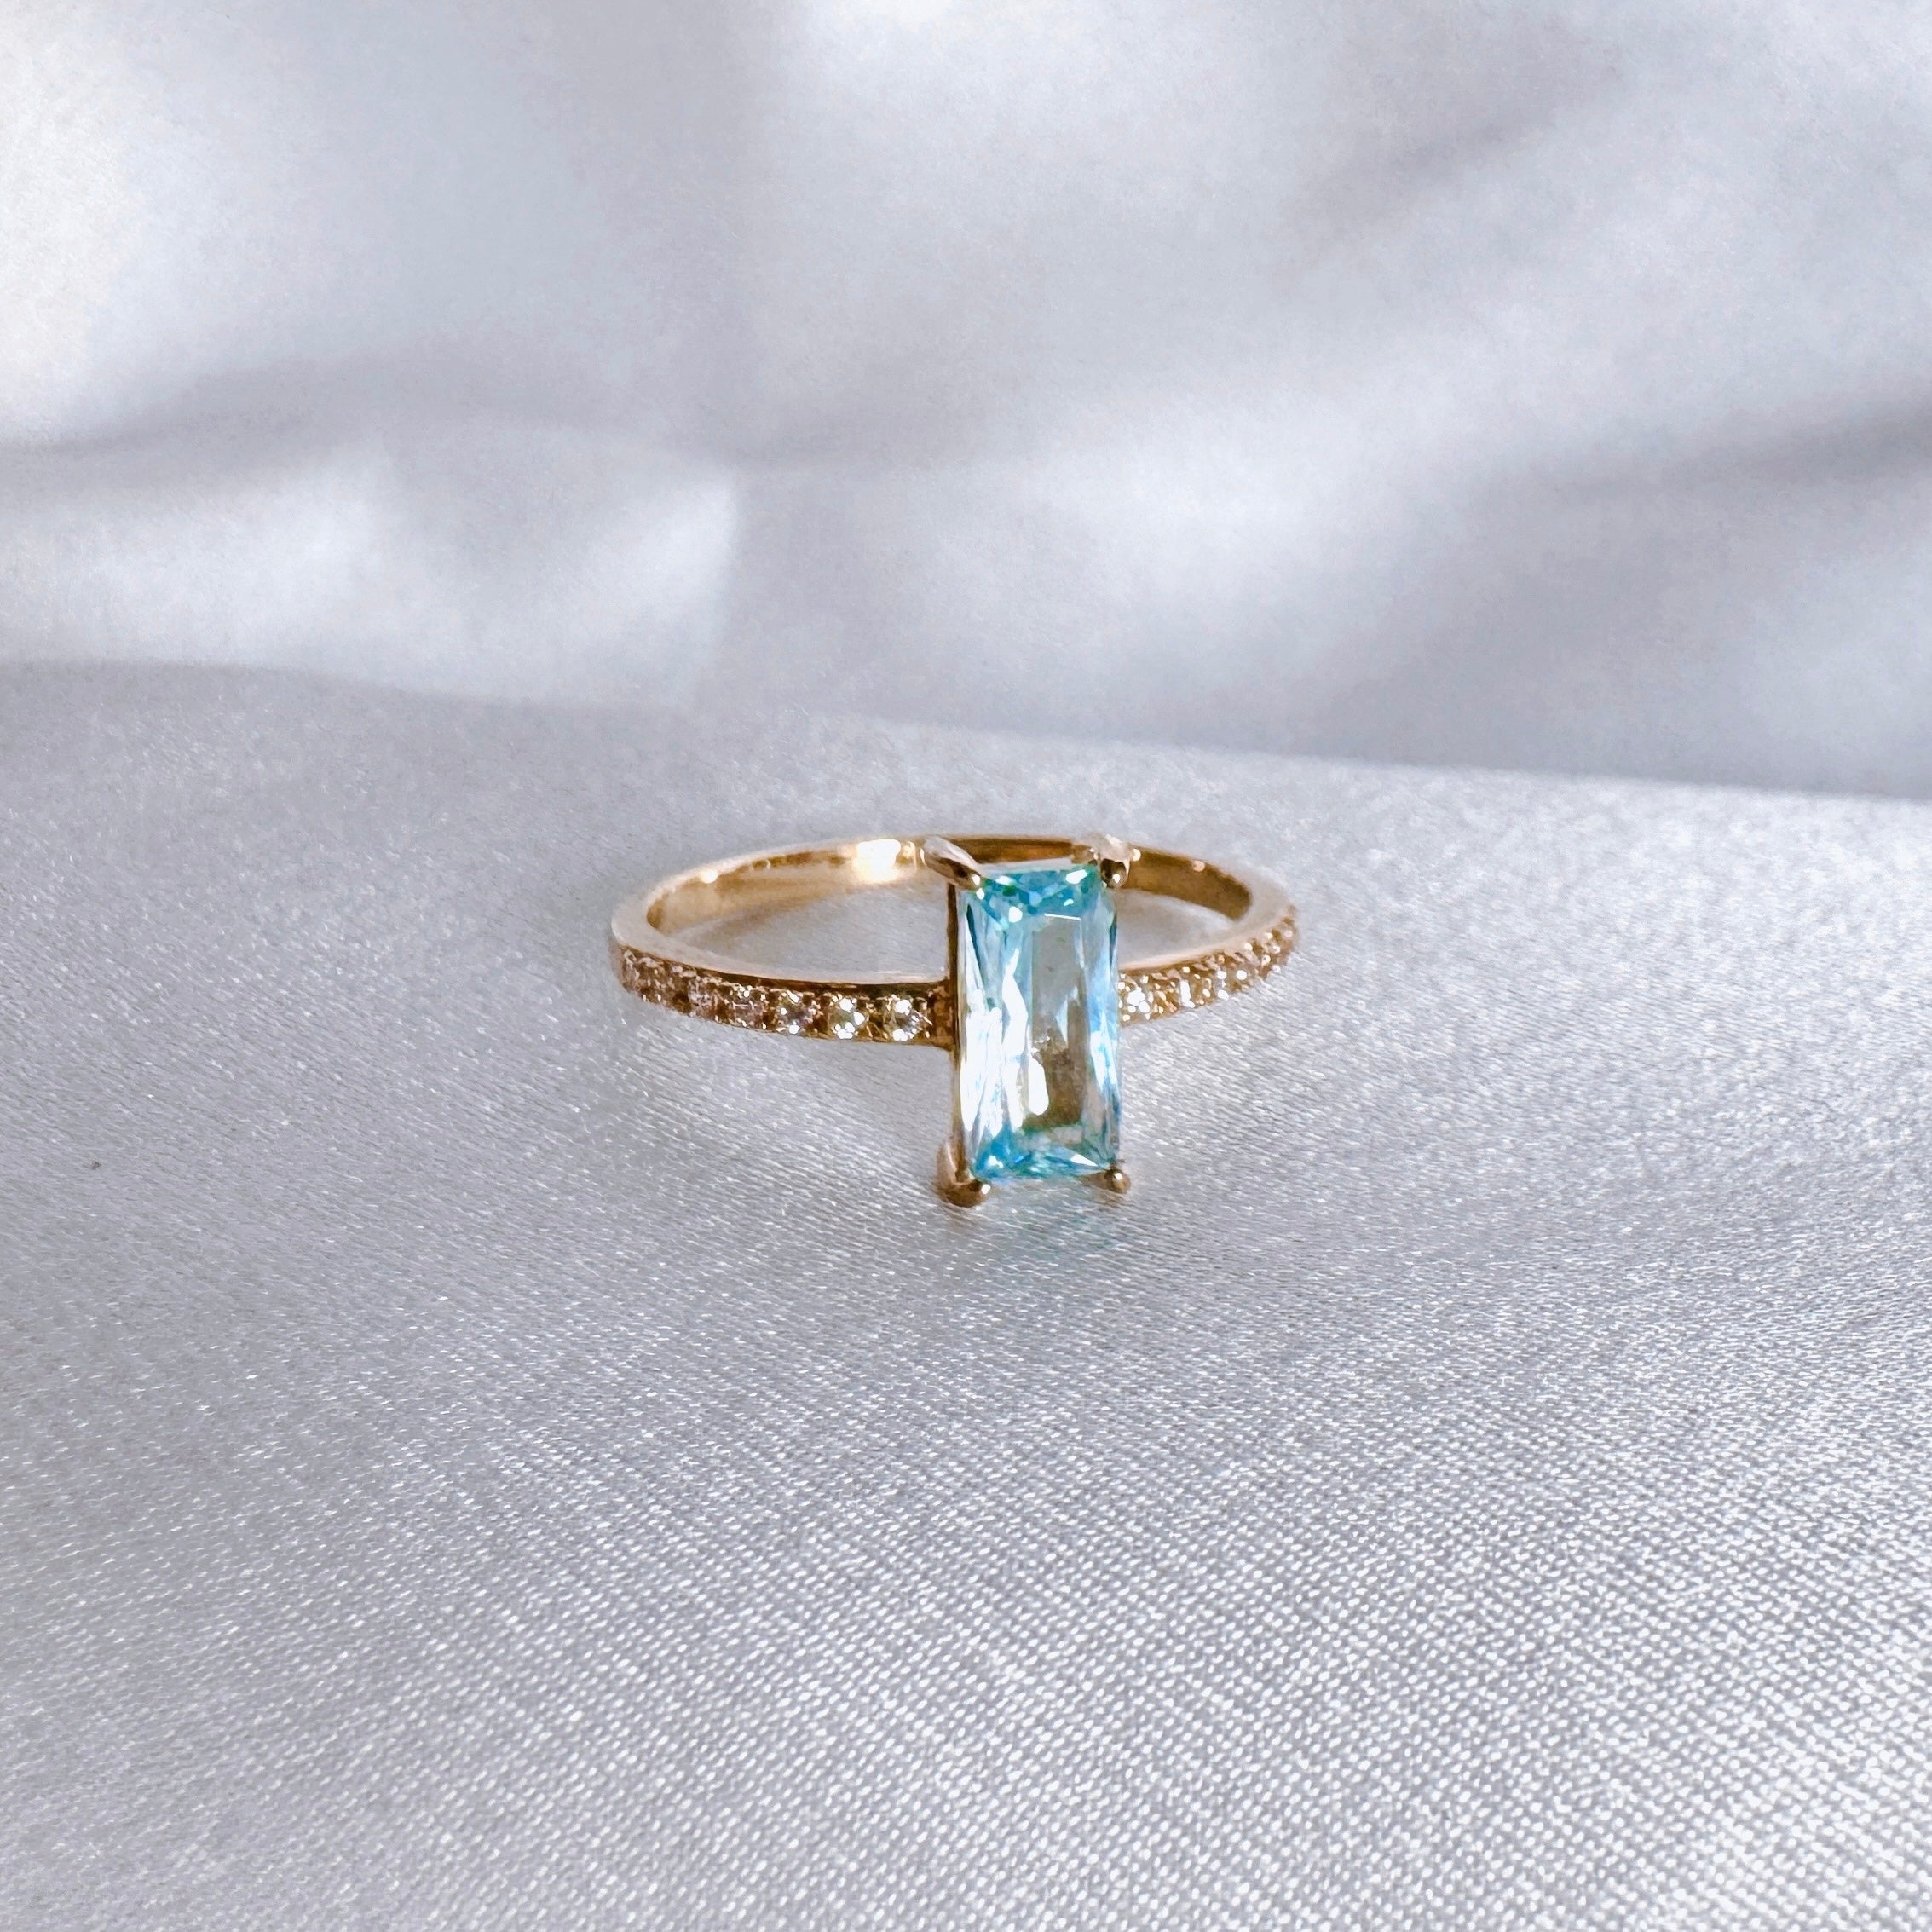 Gold-plated “Lagoon” ring